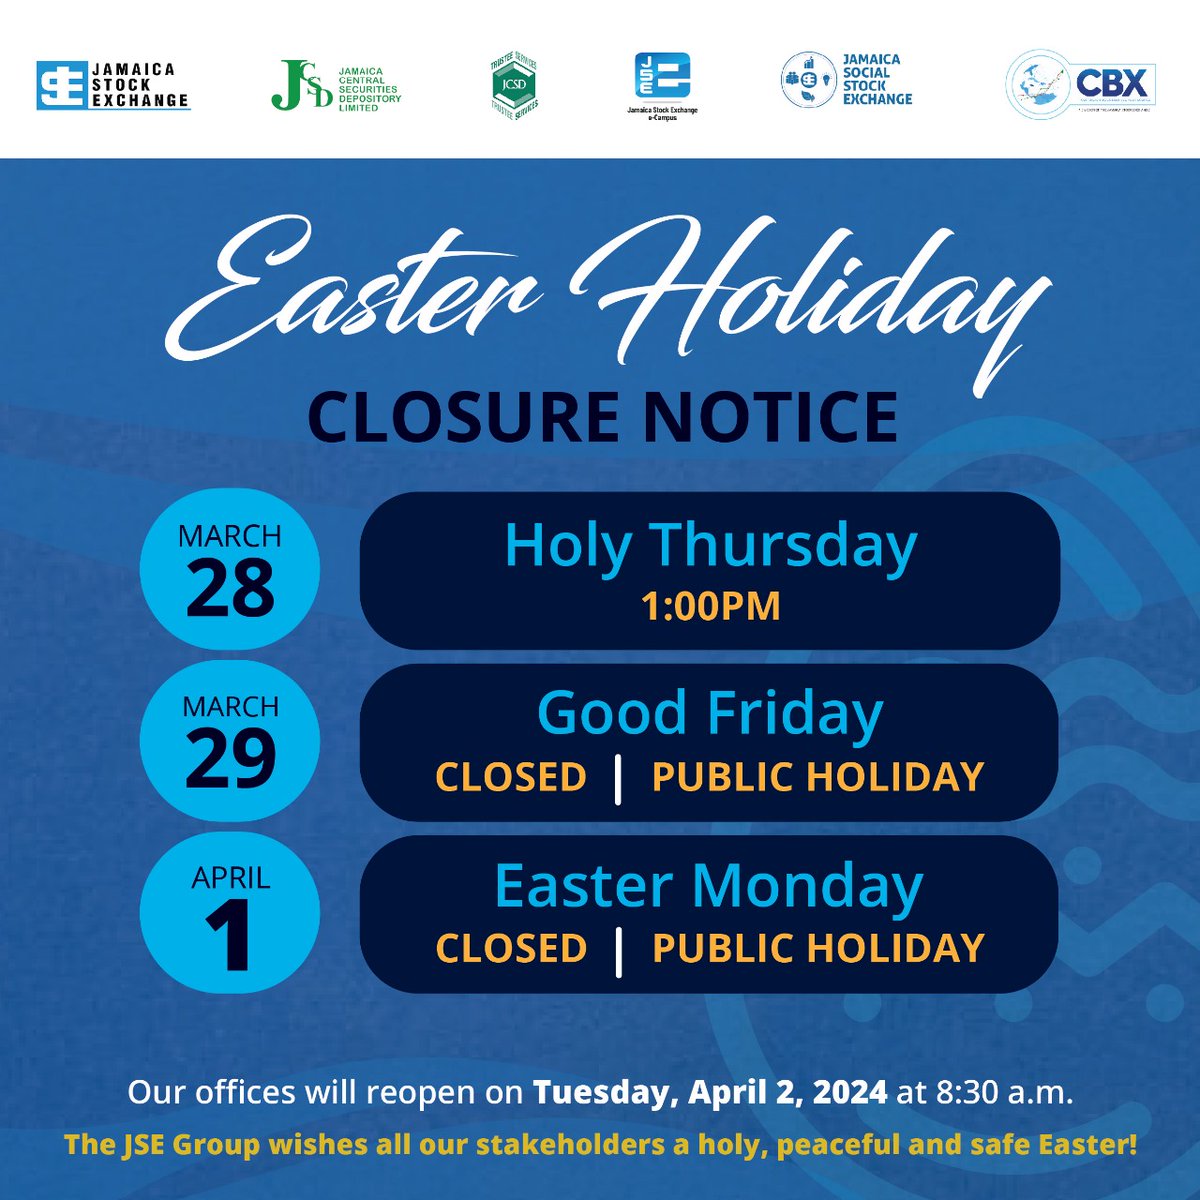 Kindly note our office hours for the Easter Holiday. Our offices will resume operations on Tuesday, April 2, 2024, at 8:30 a.m. Wishing everyone a blessed, peaceful, and safe Easter! #JSENews #EasterHoliday #HappyEaster